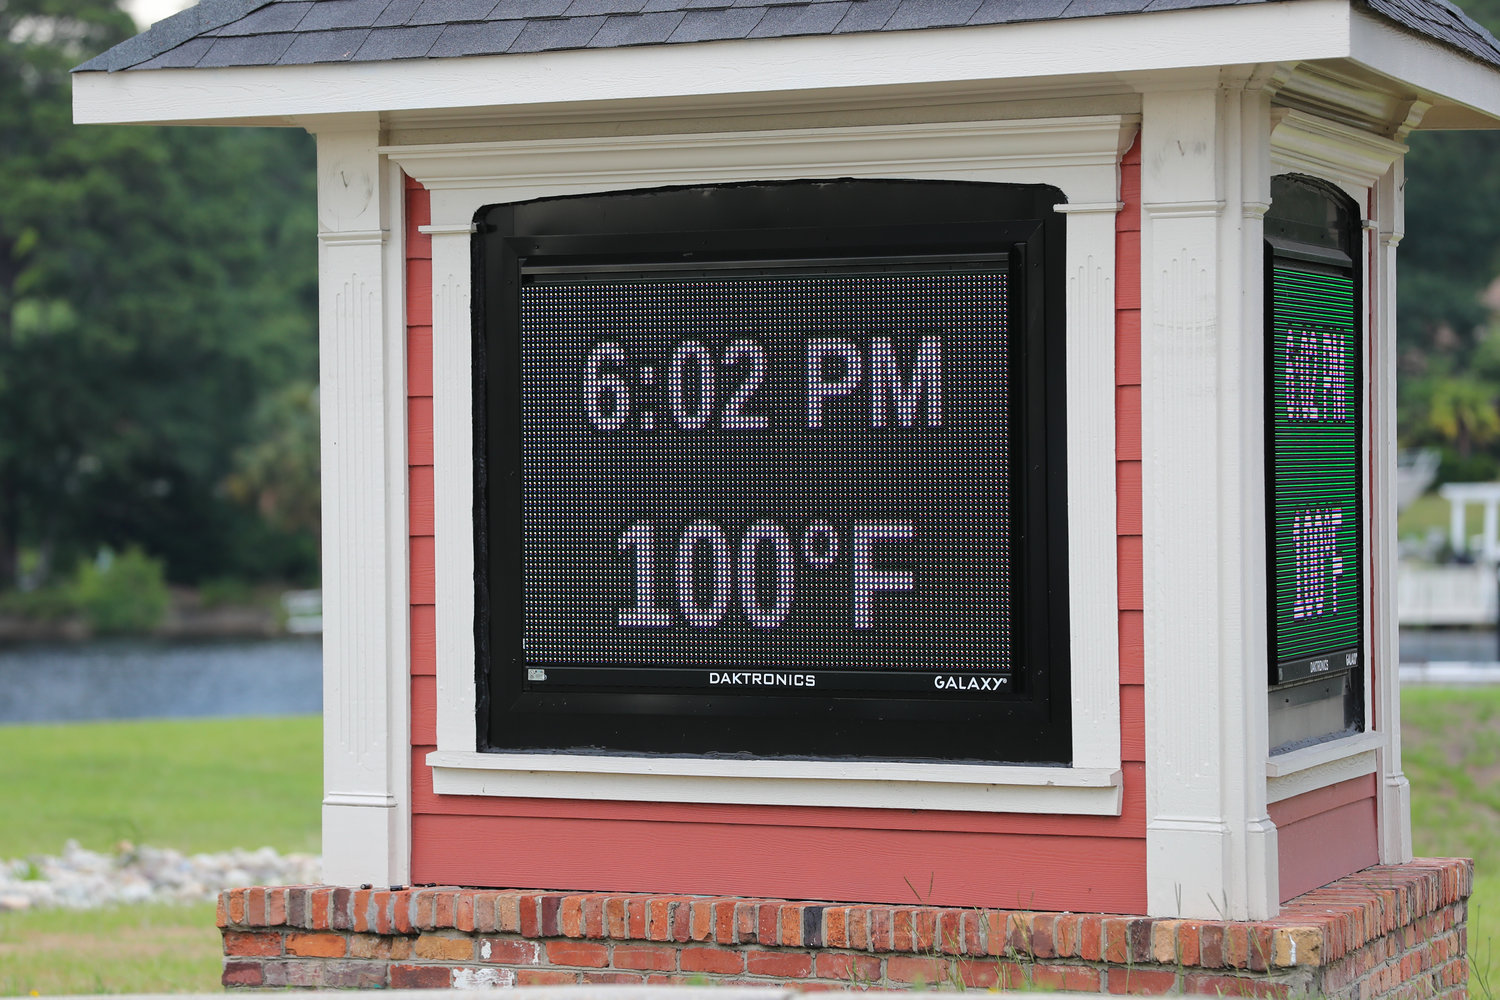 The electronic bulletin board in Hope Mills reflects the high temperature Monday evening. In response to the high temperatures this week, Cumberland County has opened select buildings as cooling stations for those who don’t have air conditioning.